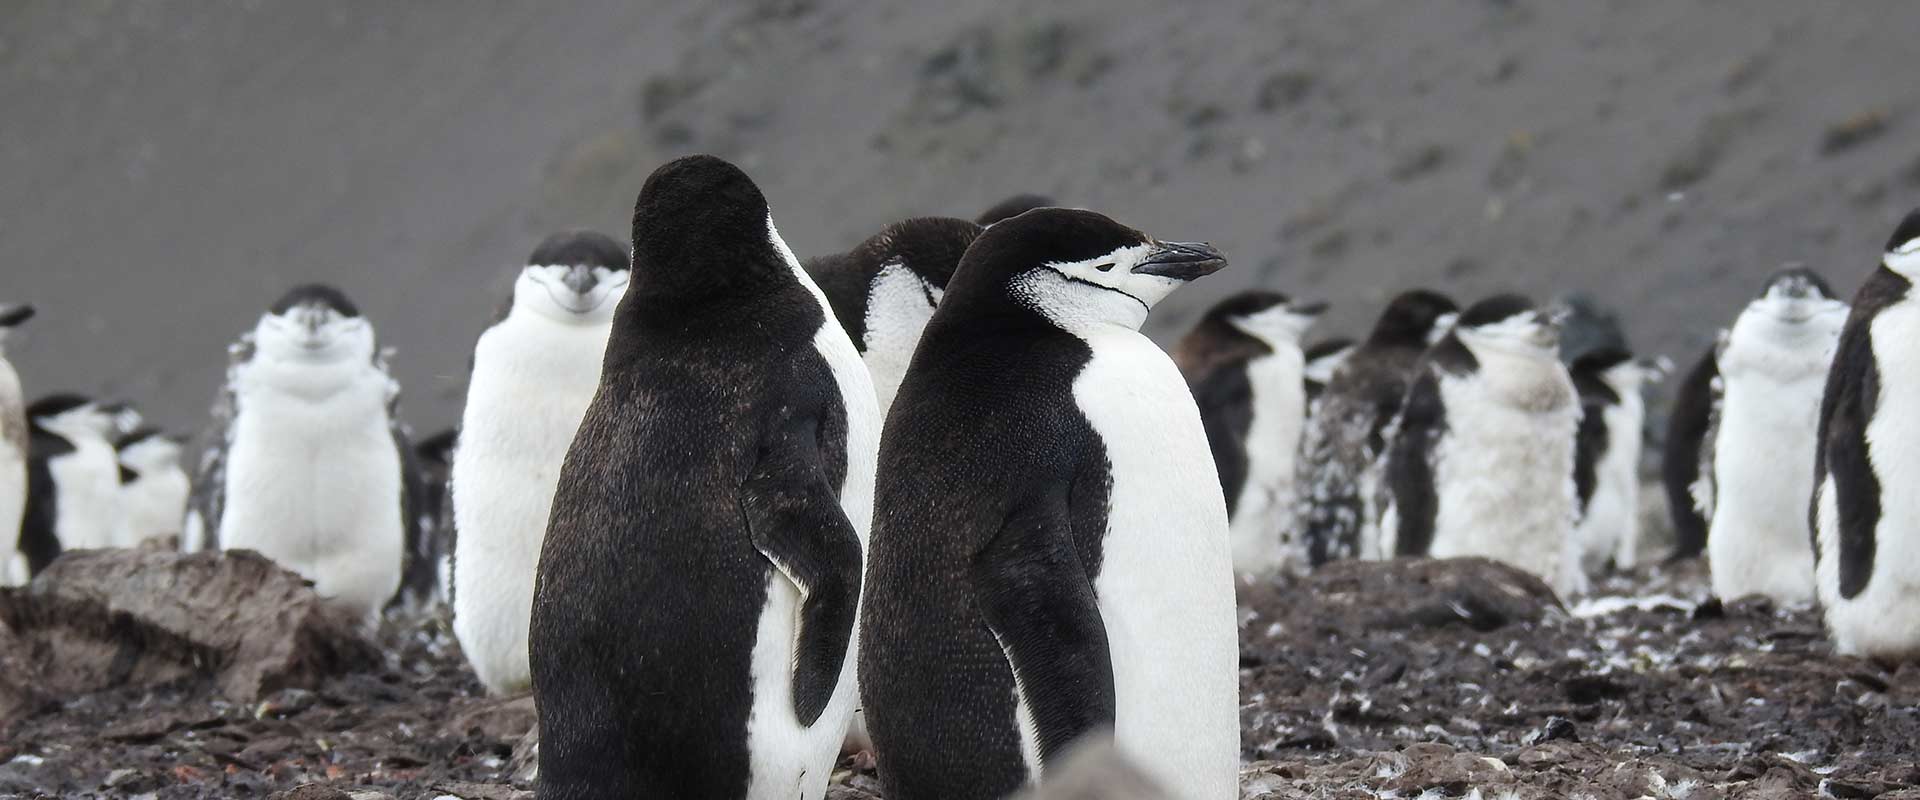 Group of pengiuns standing together on land, Antarctica